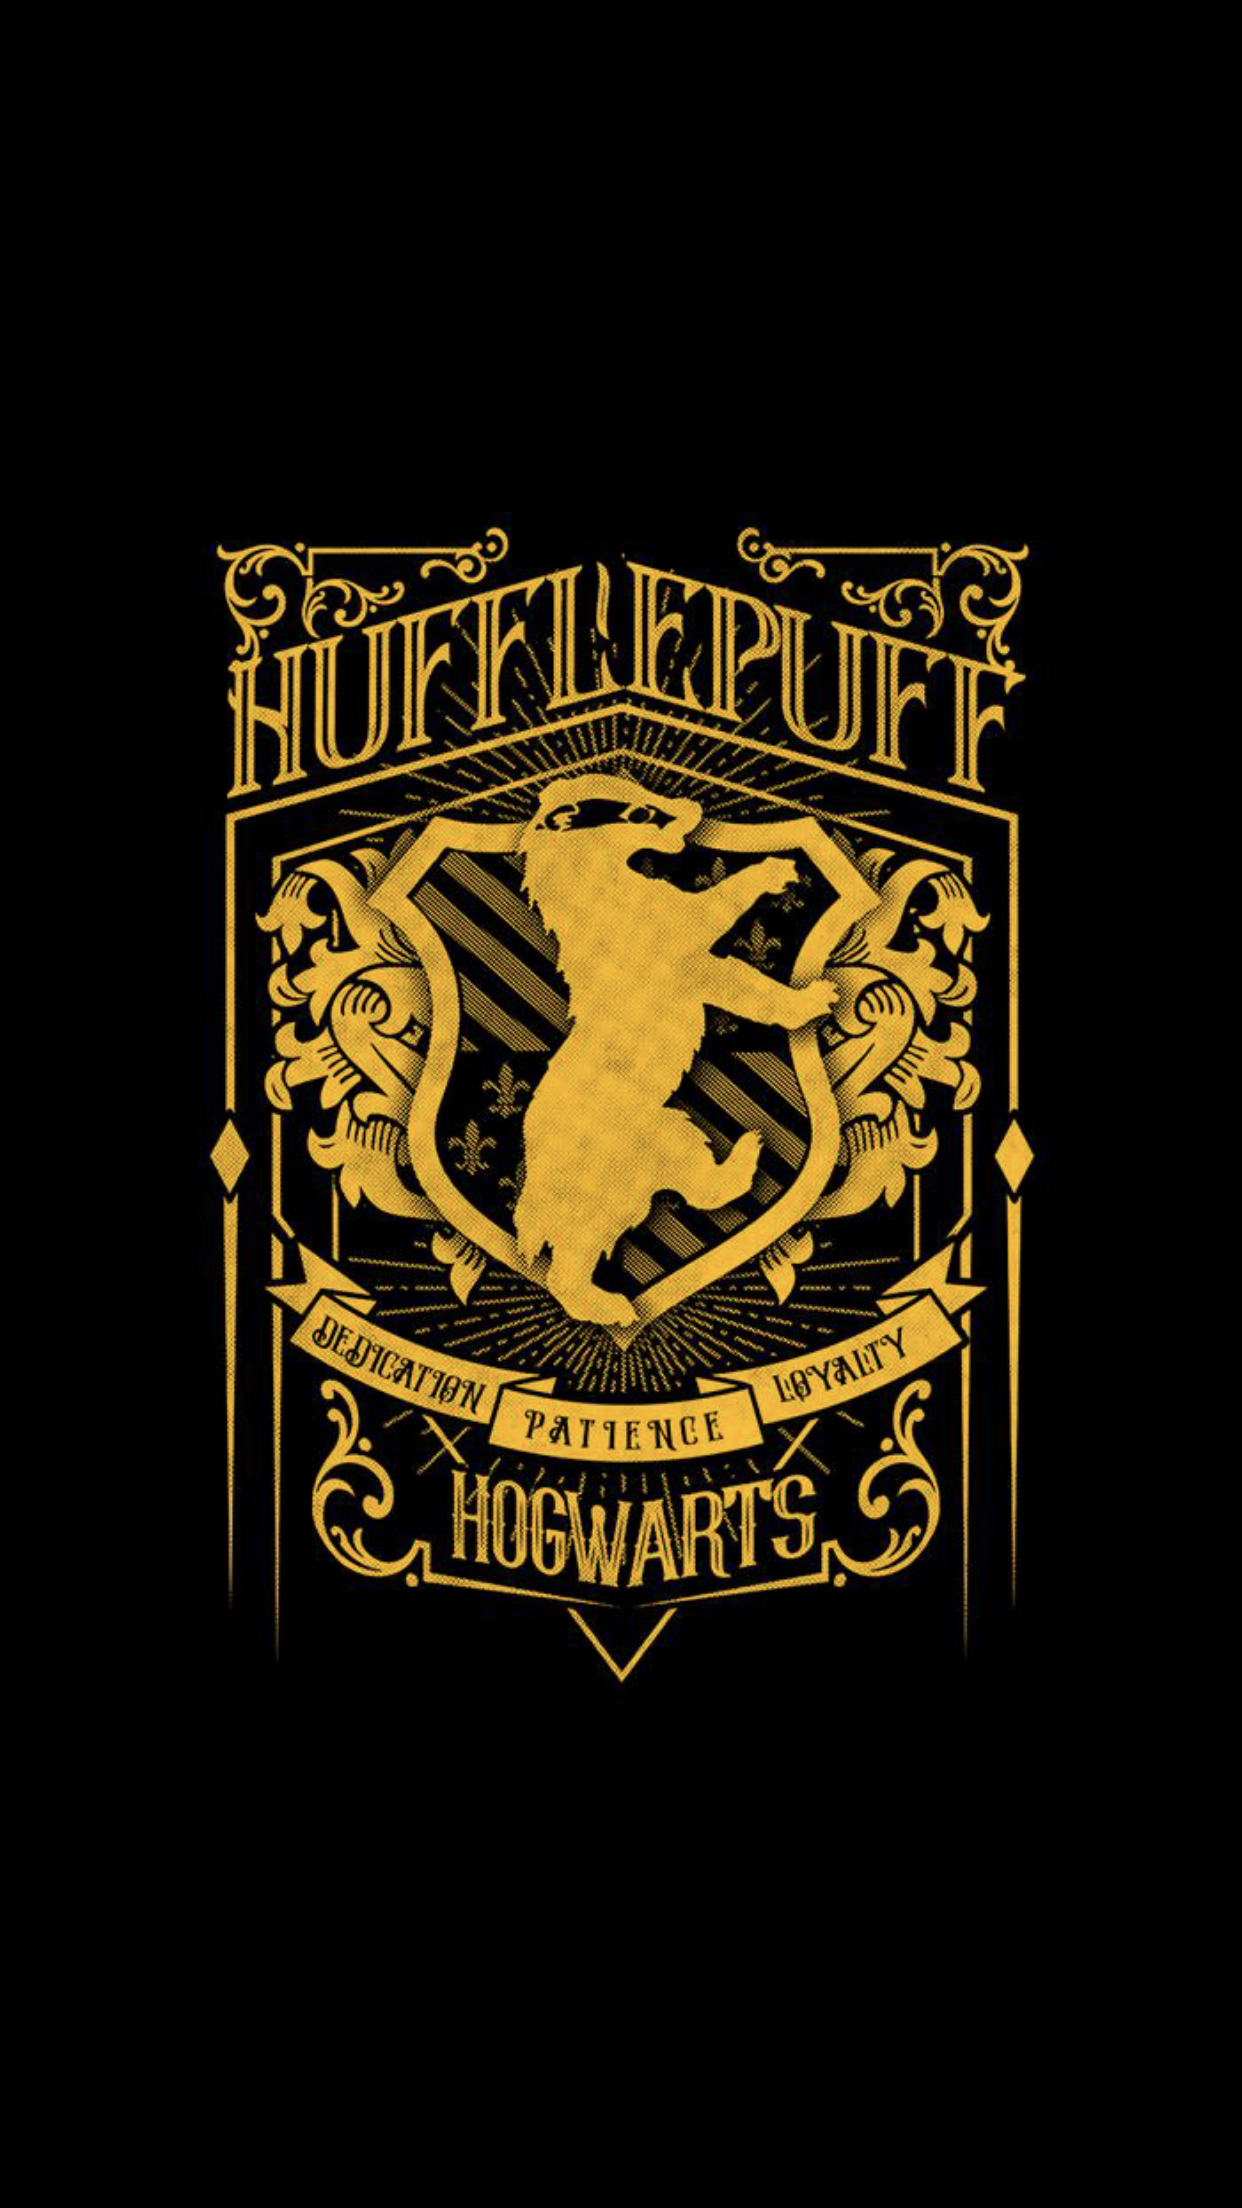 Modern Looking Hufflepuff Crest. This Would Be A Cool T Shirt Design!. Coisas De Harry Potter, Harry Potter Itens, Desenhos Harry Potter